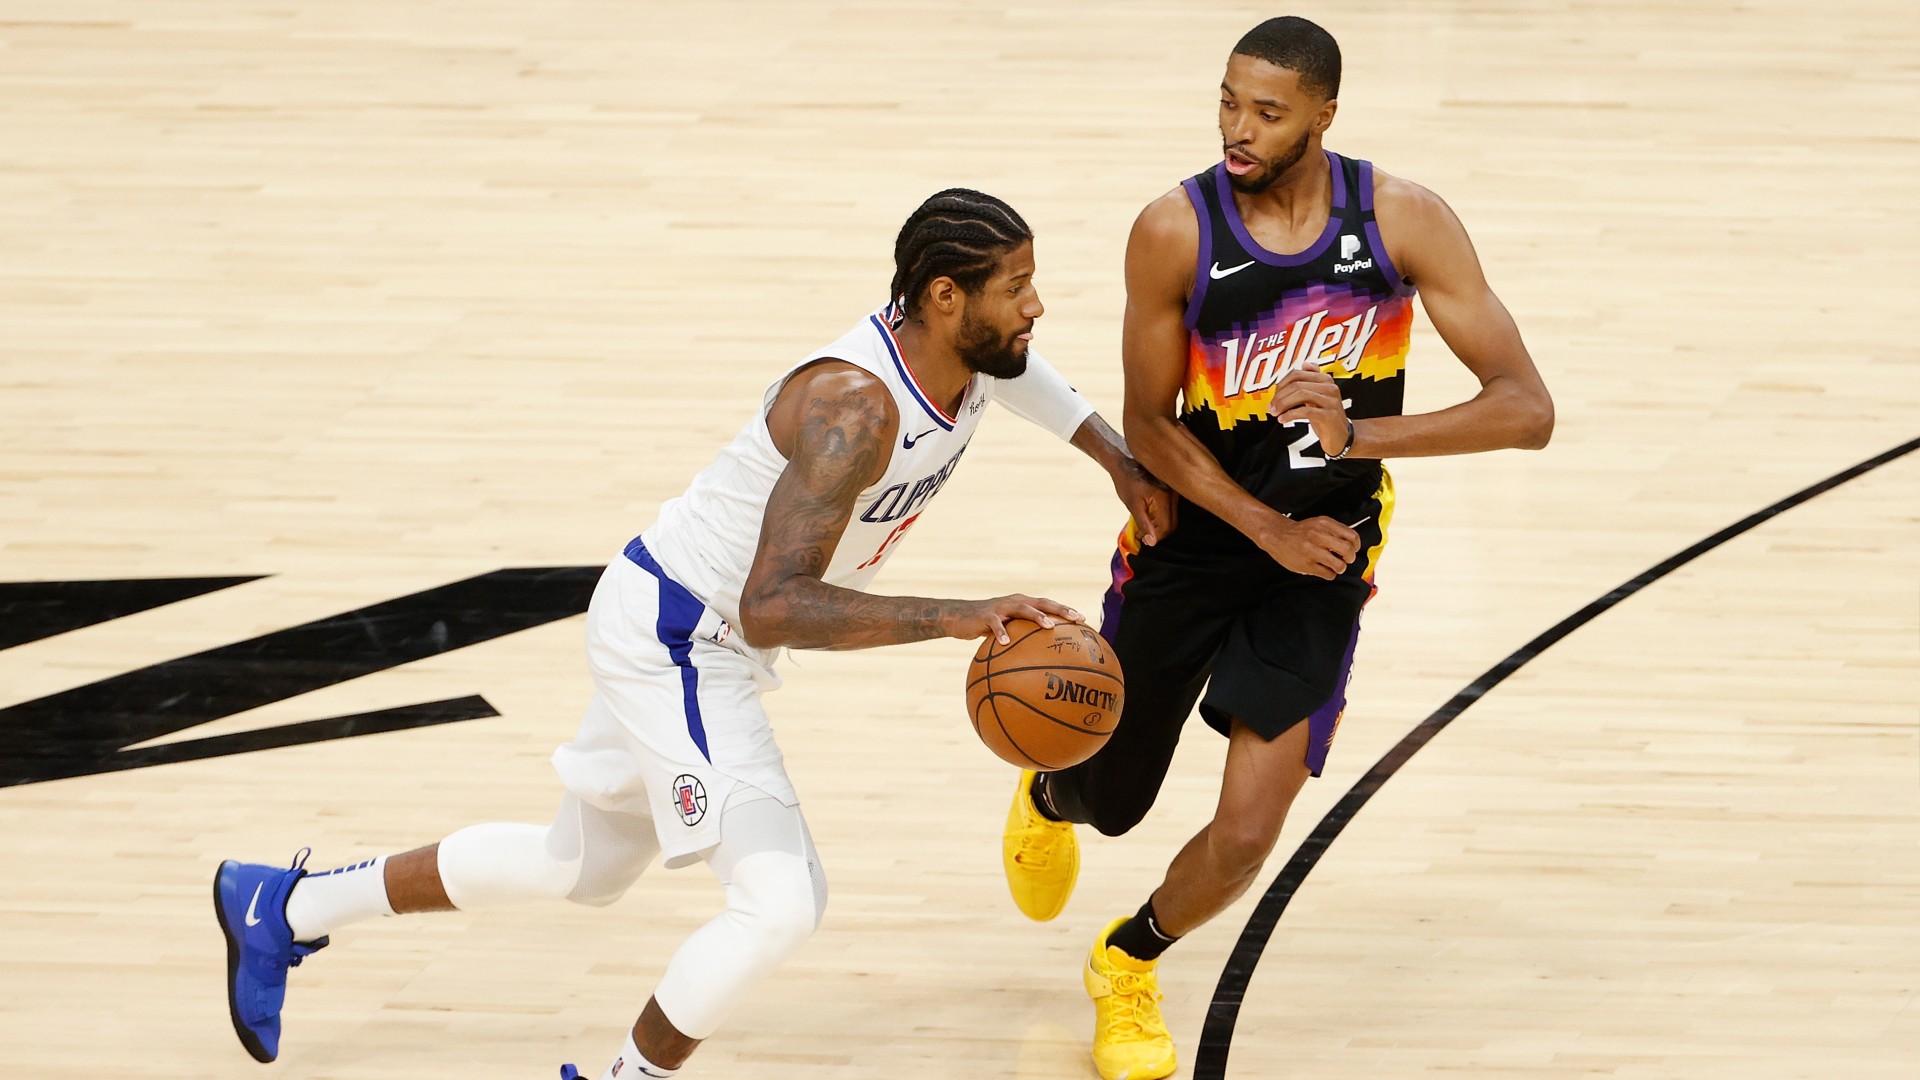 Photo of The Clippers’ Paul George set a career high in postseason scoring: in his saving performance against the Suns in the series